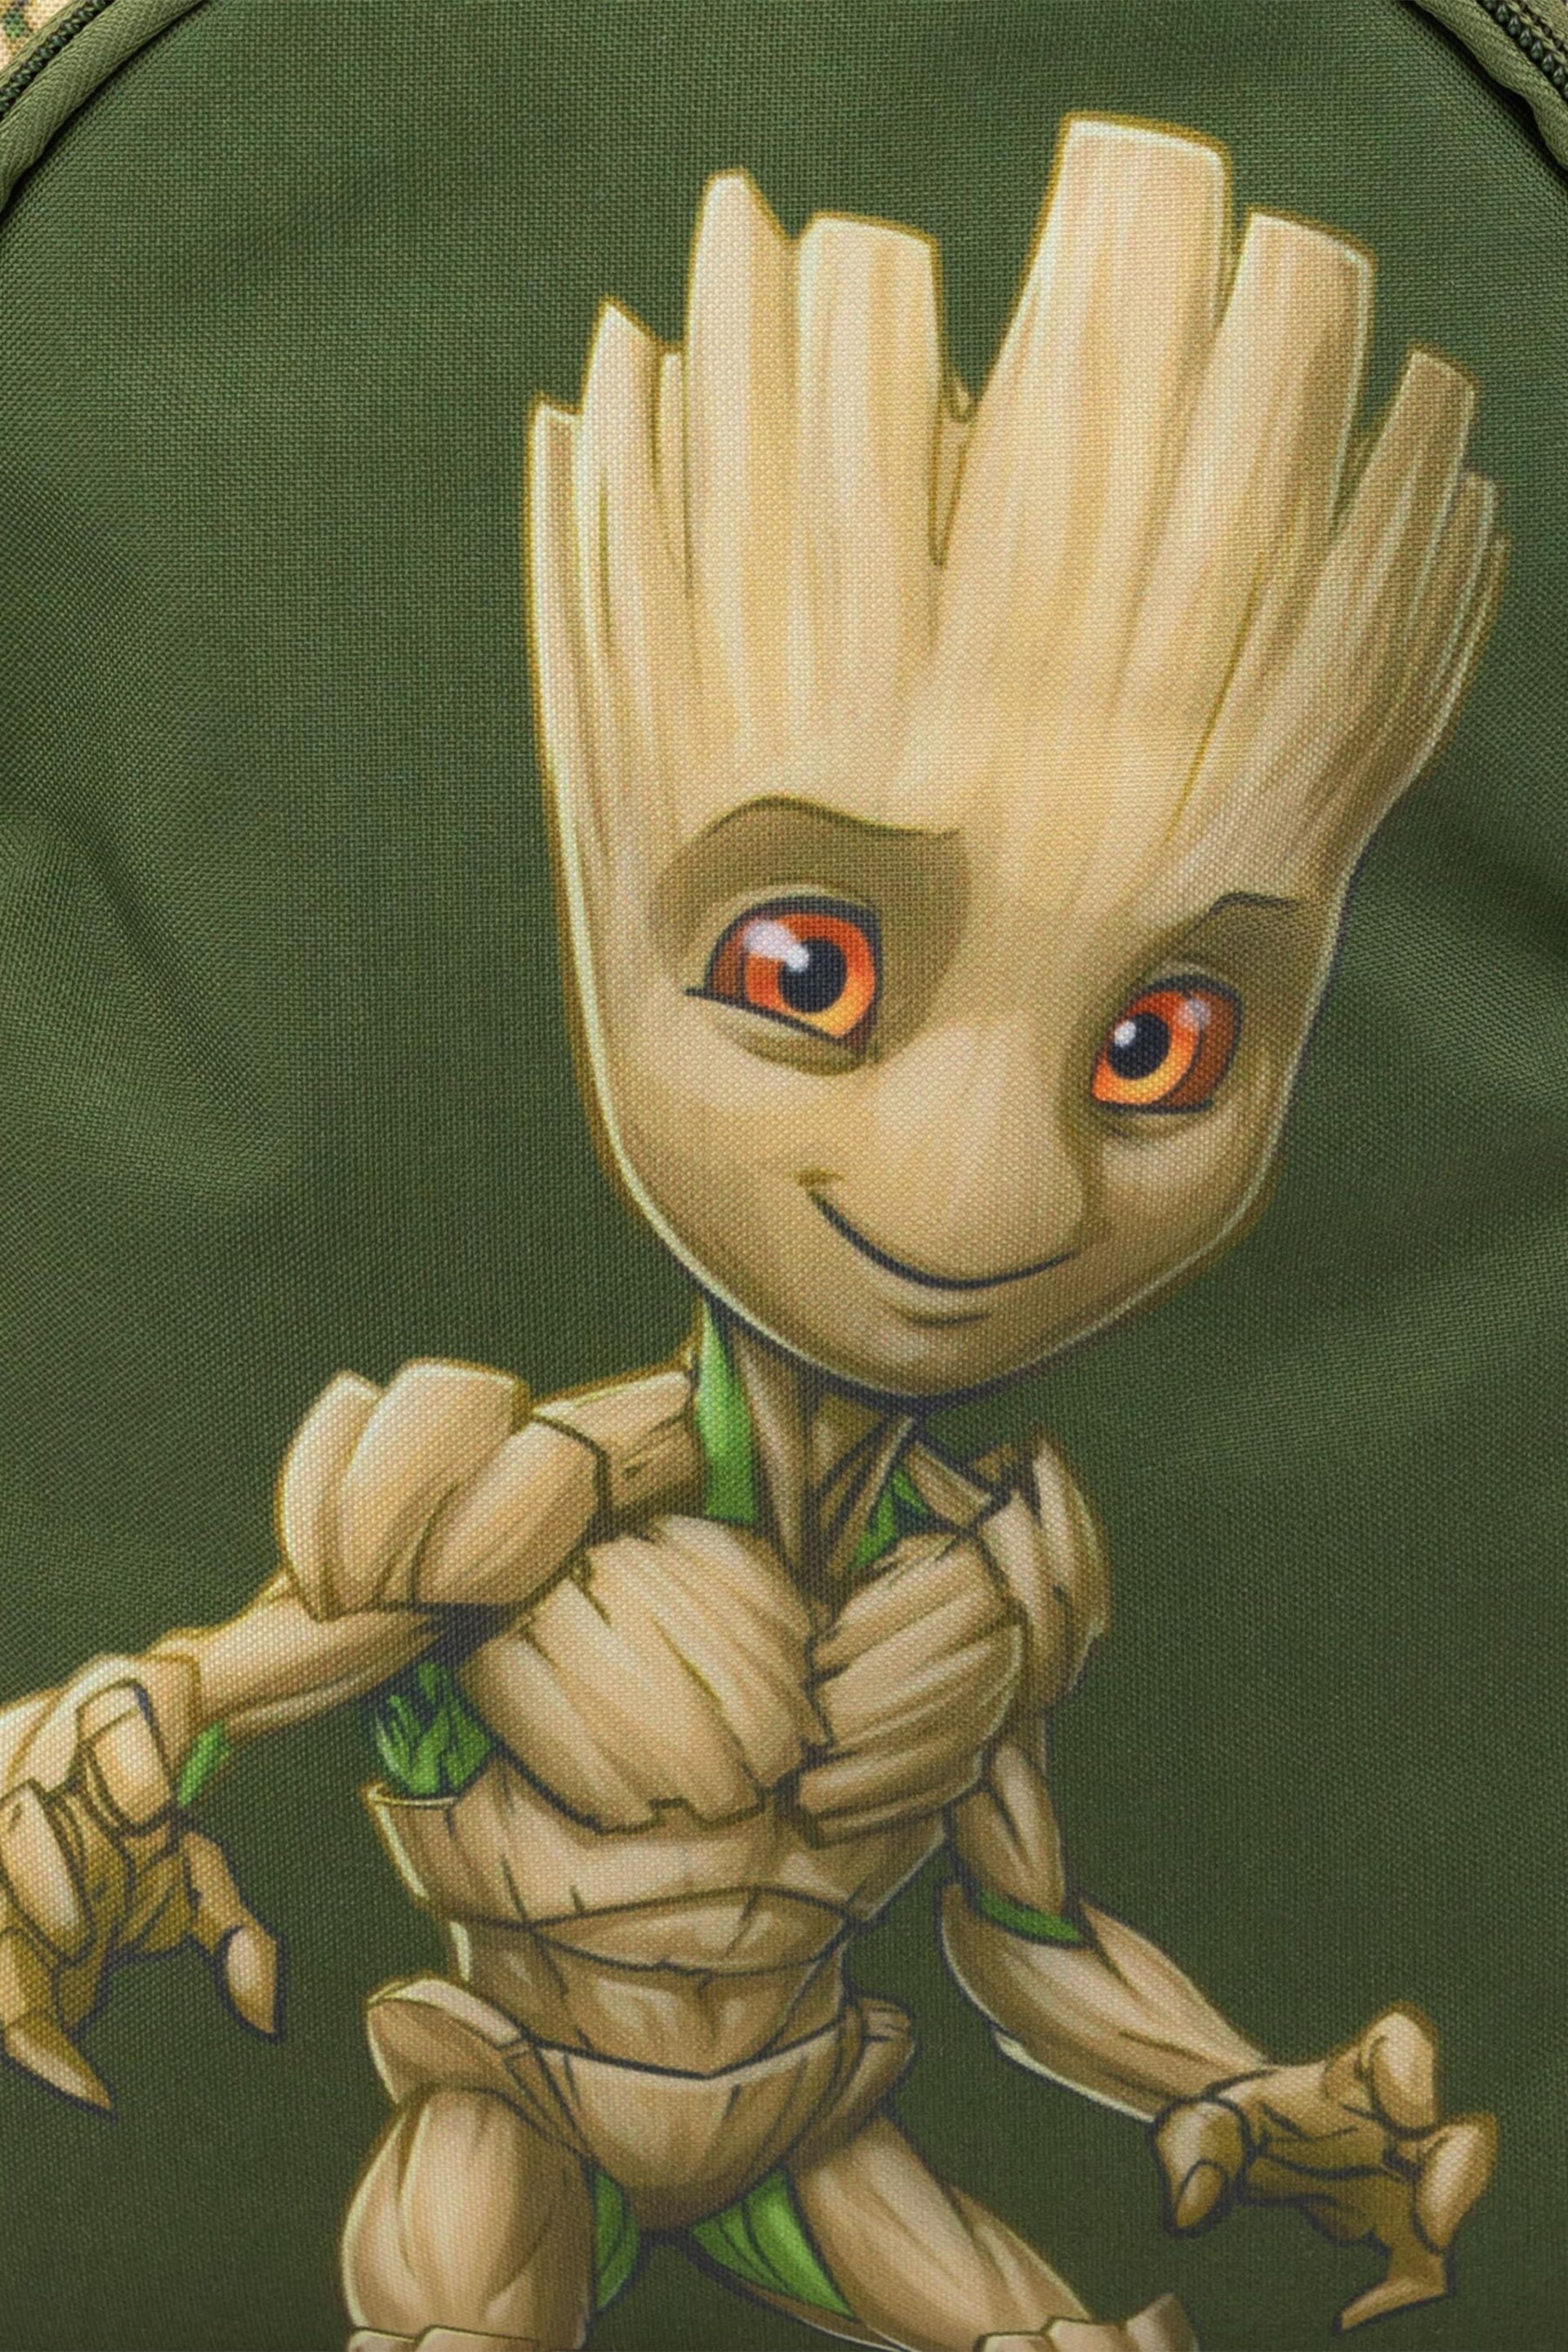 Vanilla Underground Green Marvel Unisex Kids Groot Guardian Of The Galaxy Backpack - Image 6 of 6